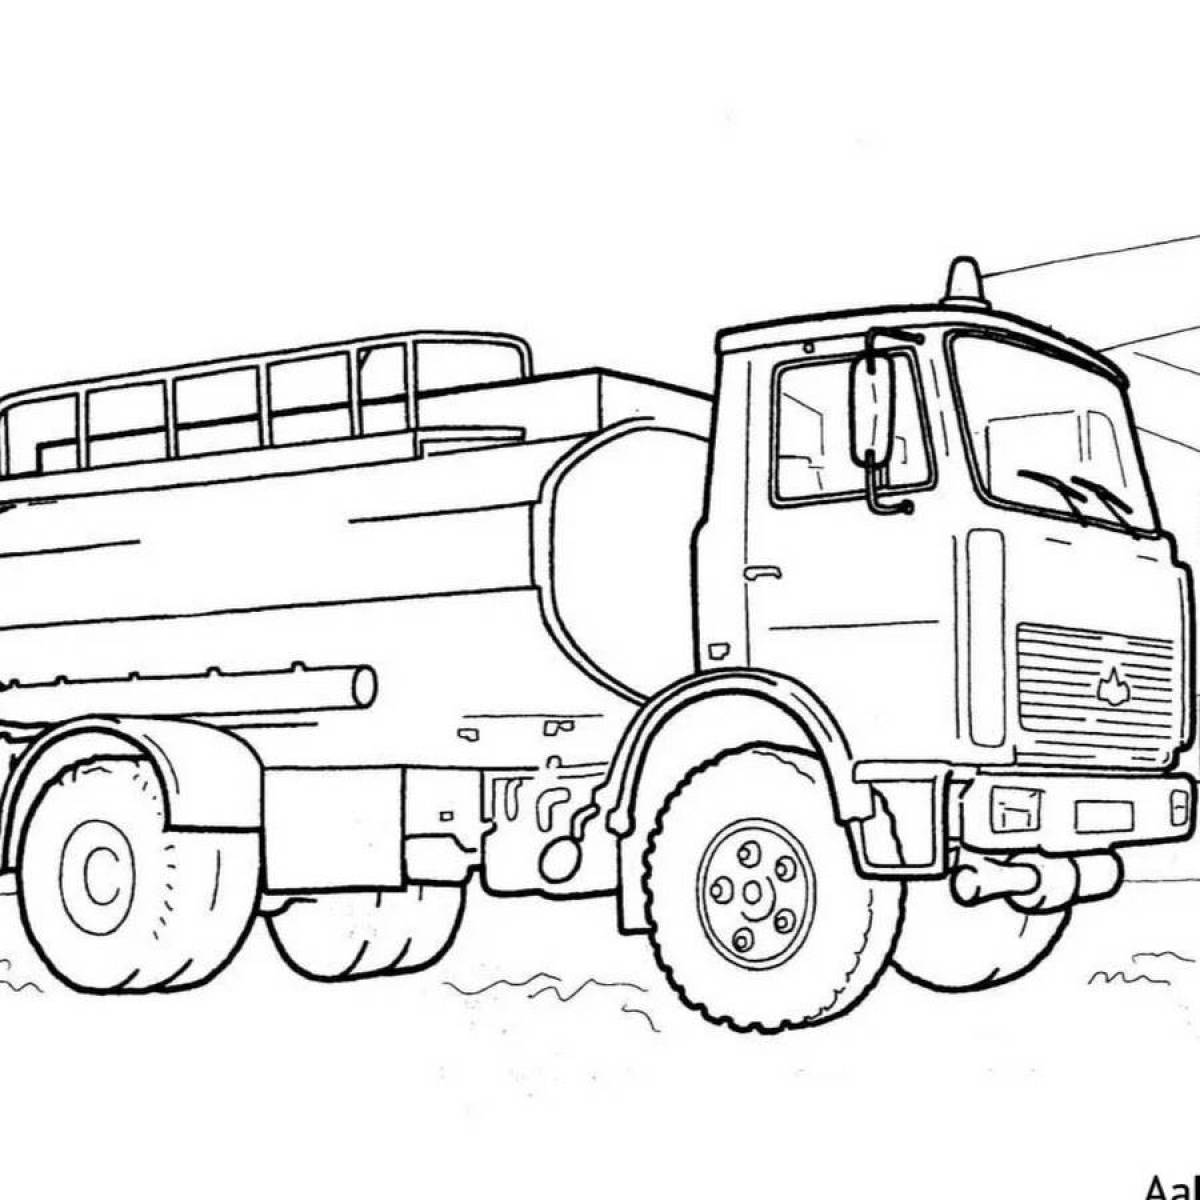 Fabulous fuel truck coloring page